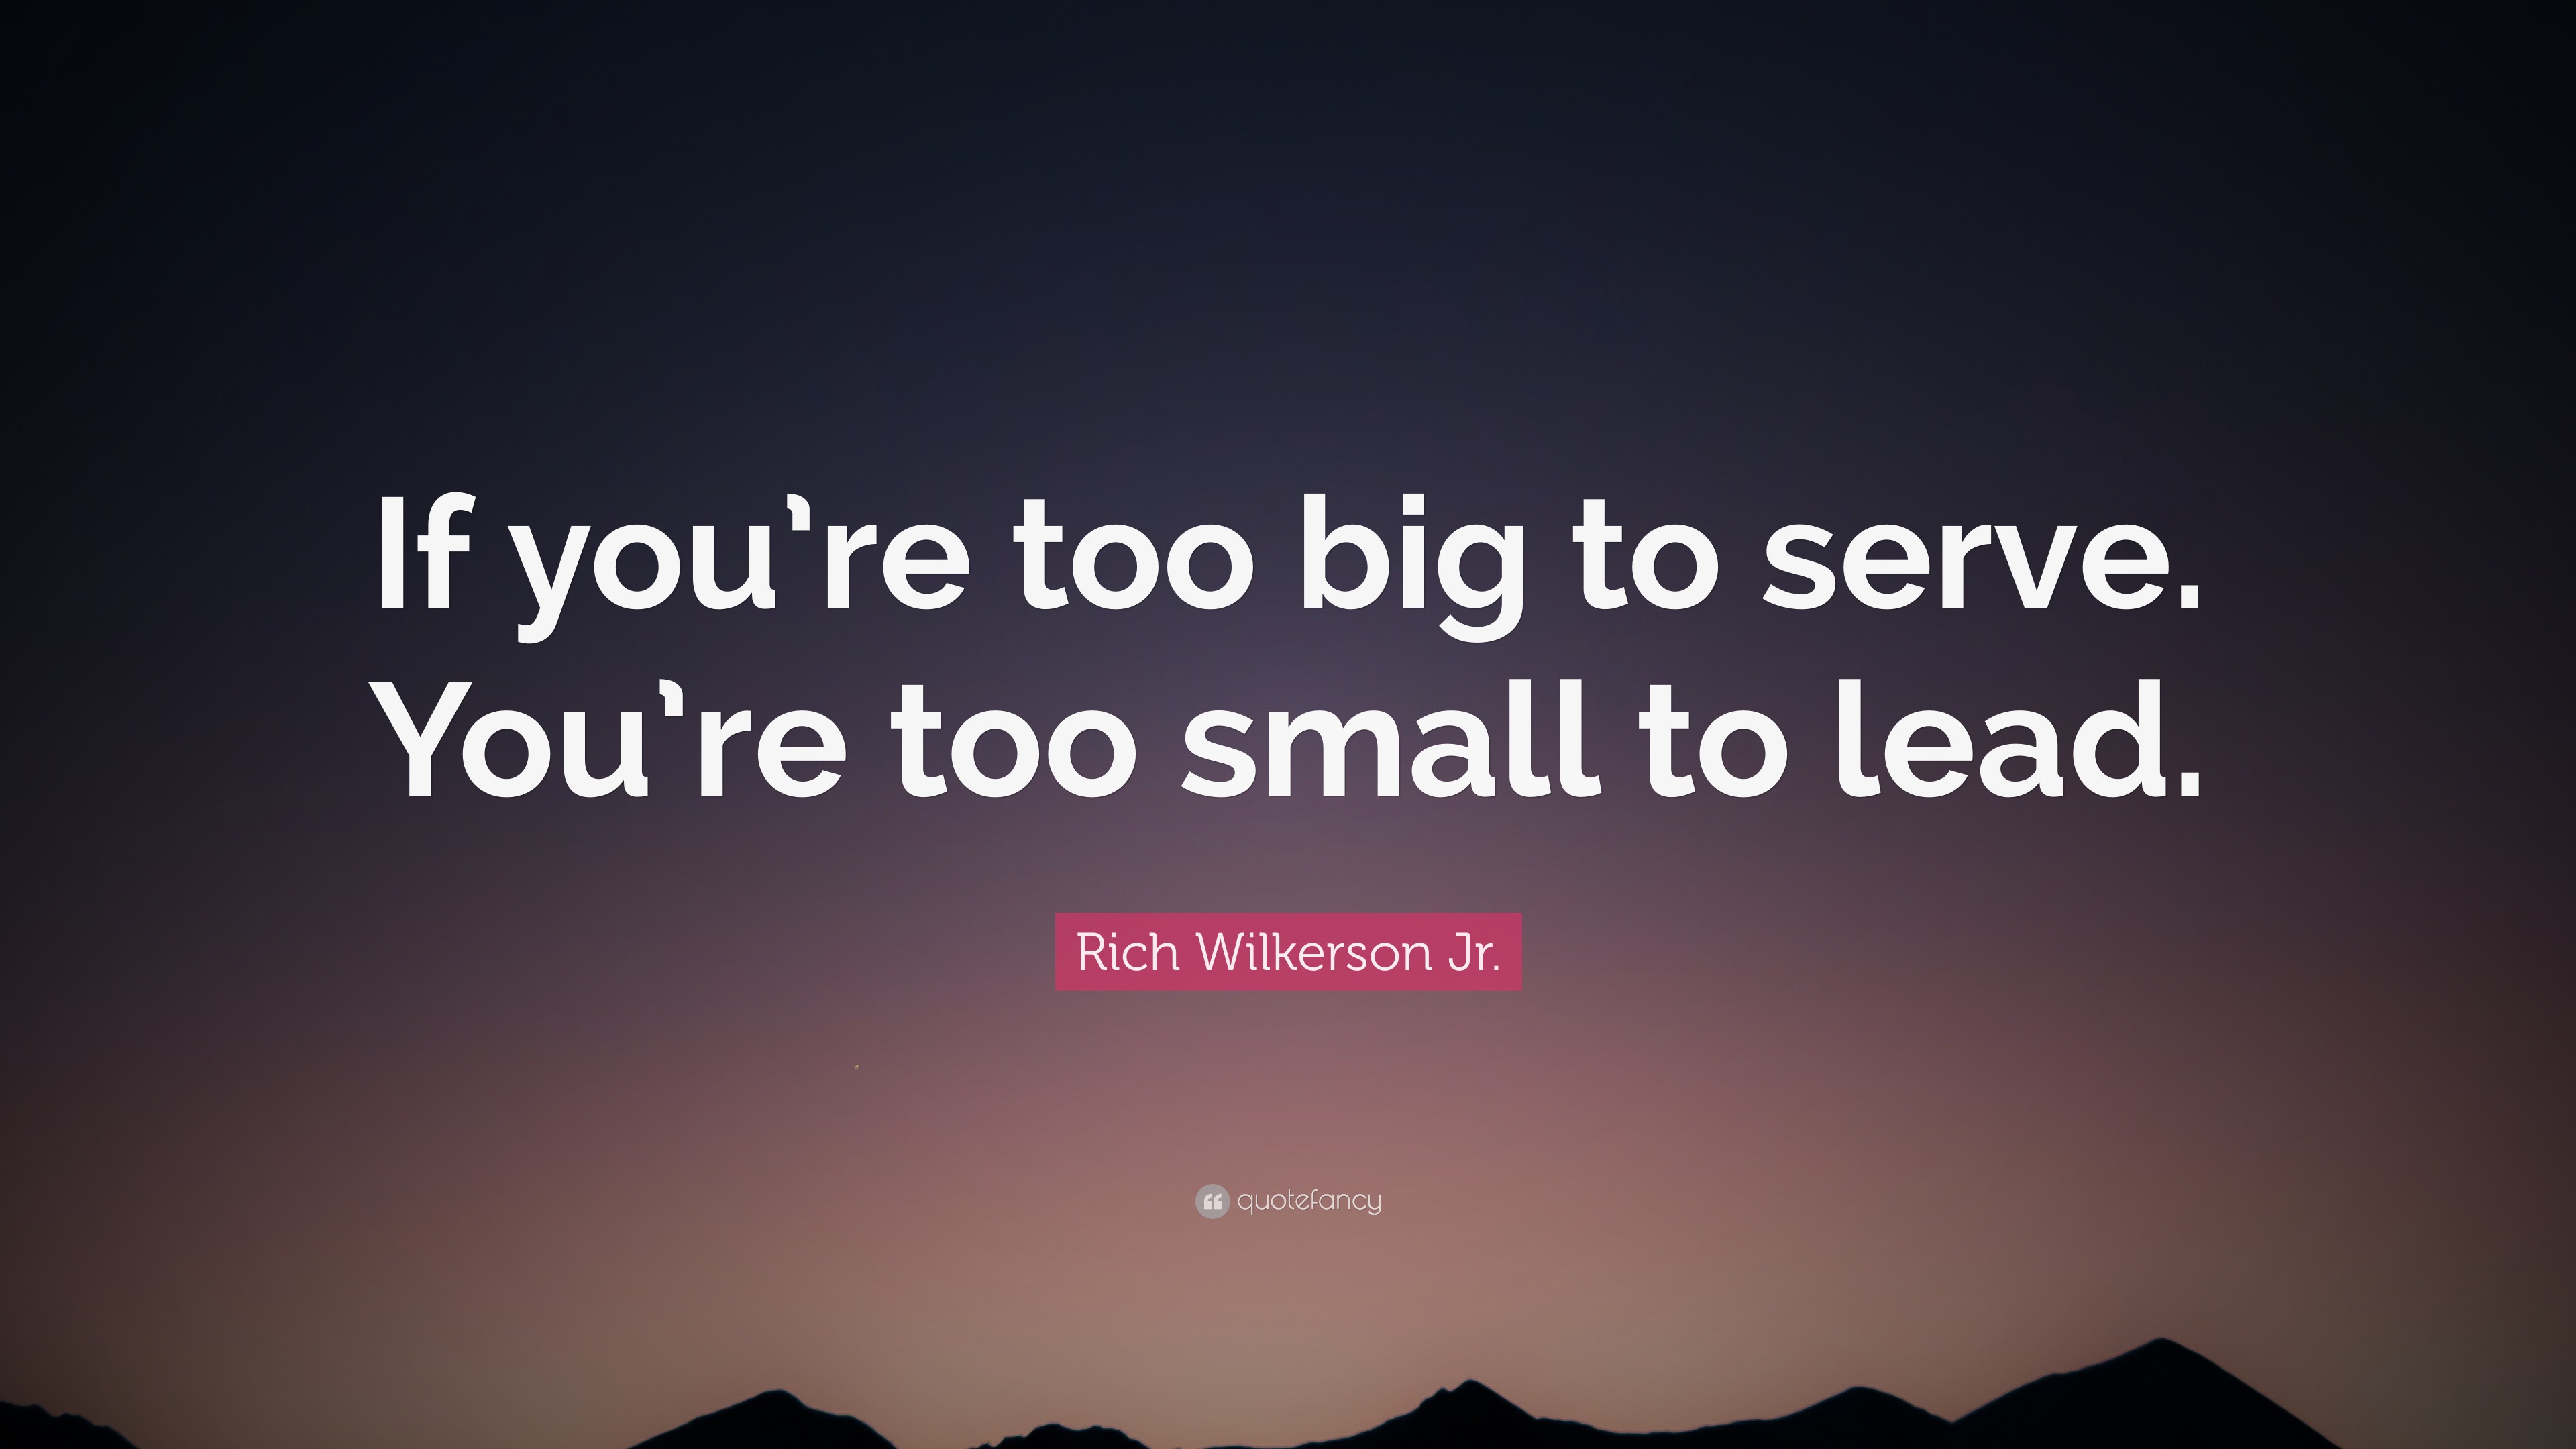 Miracle Channel - If you're too big to serve, you're too small to lead. -  Rich Wilkerson Jr. #MiracleChannel #DailyInspiration #Leadership